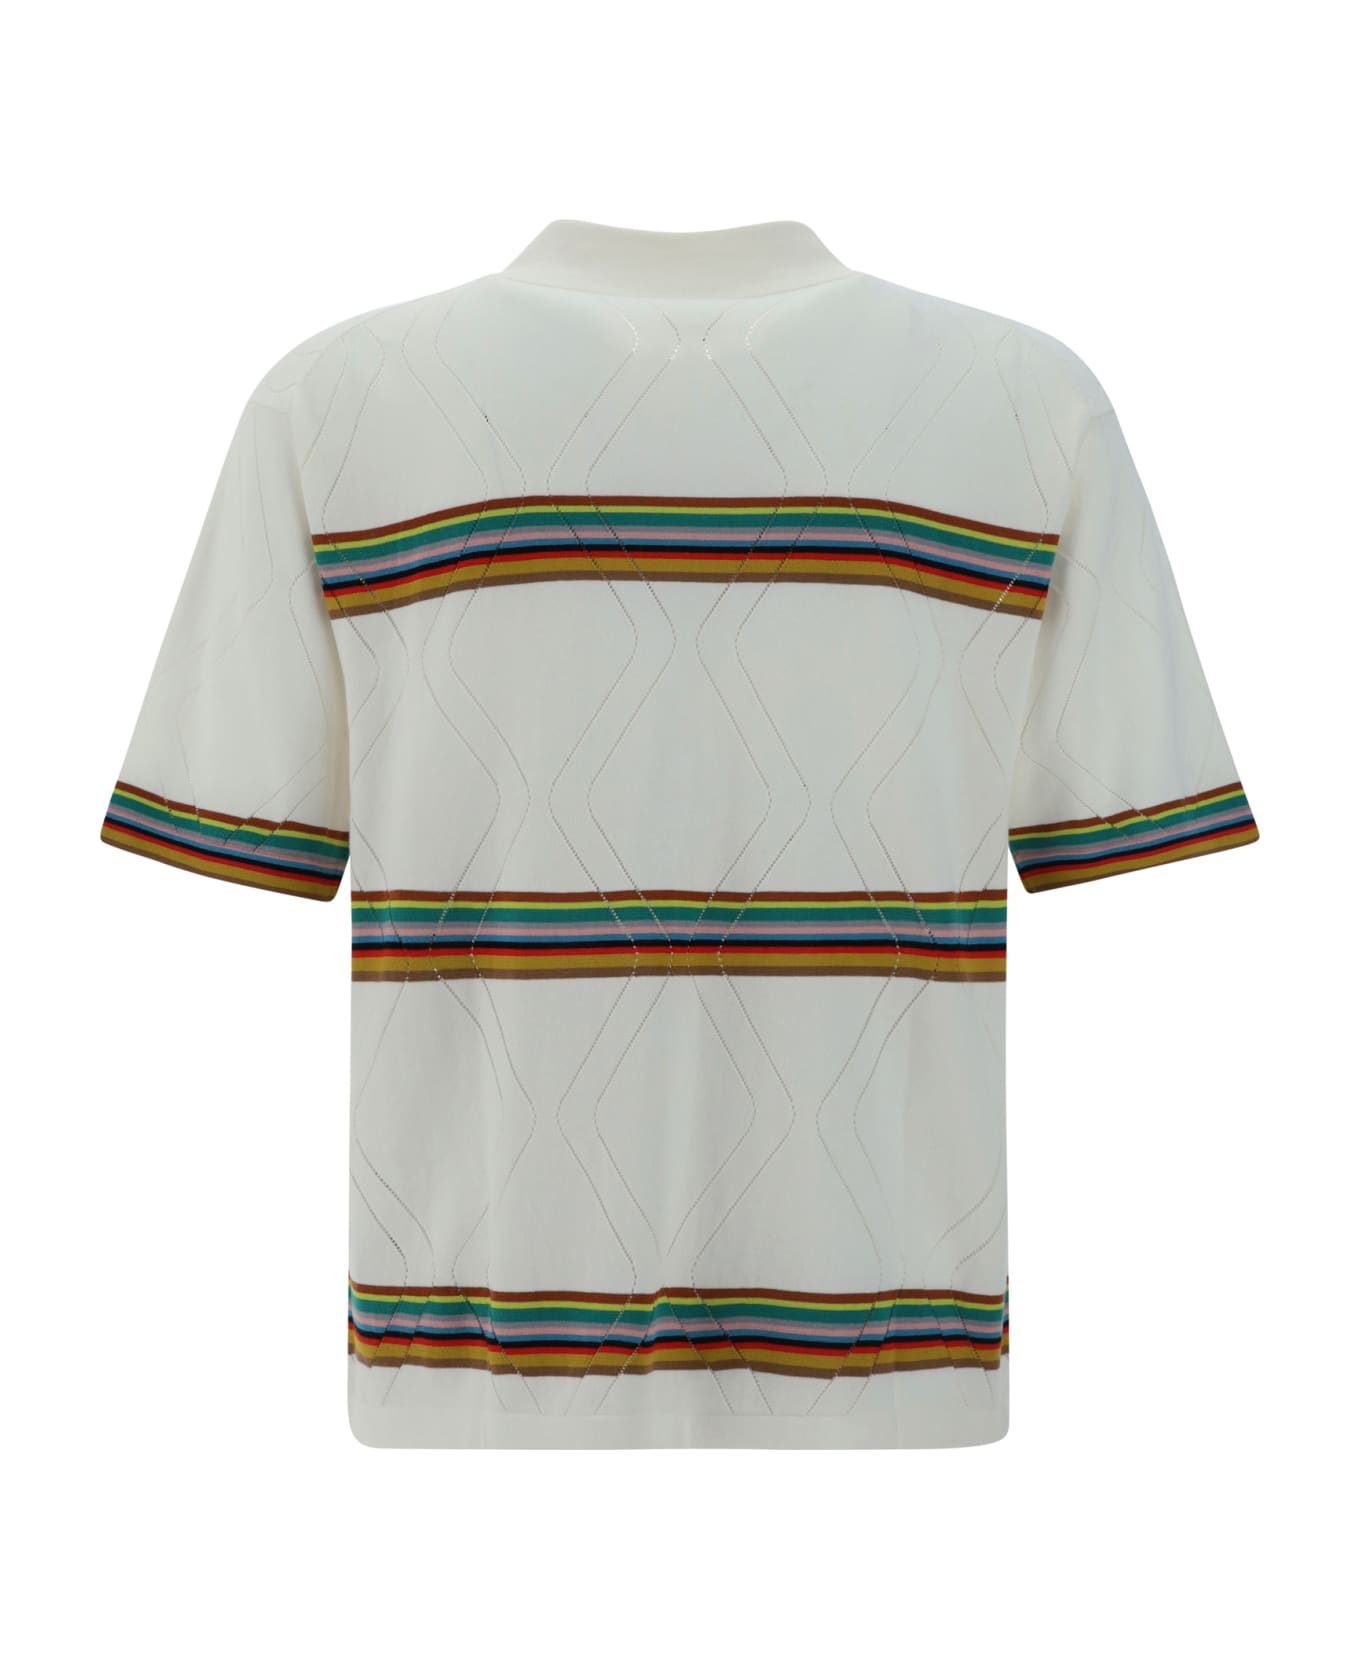 Paul Smith Shirt - Offwh